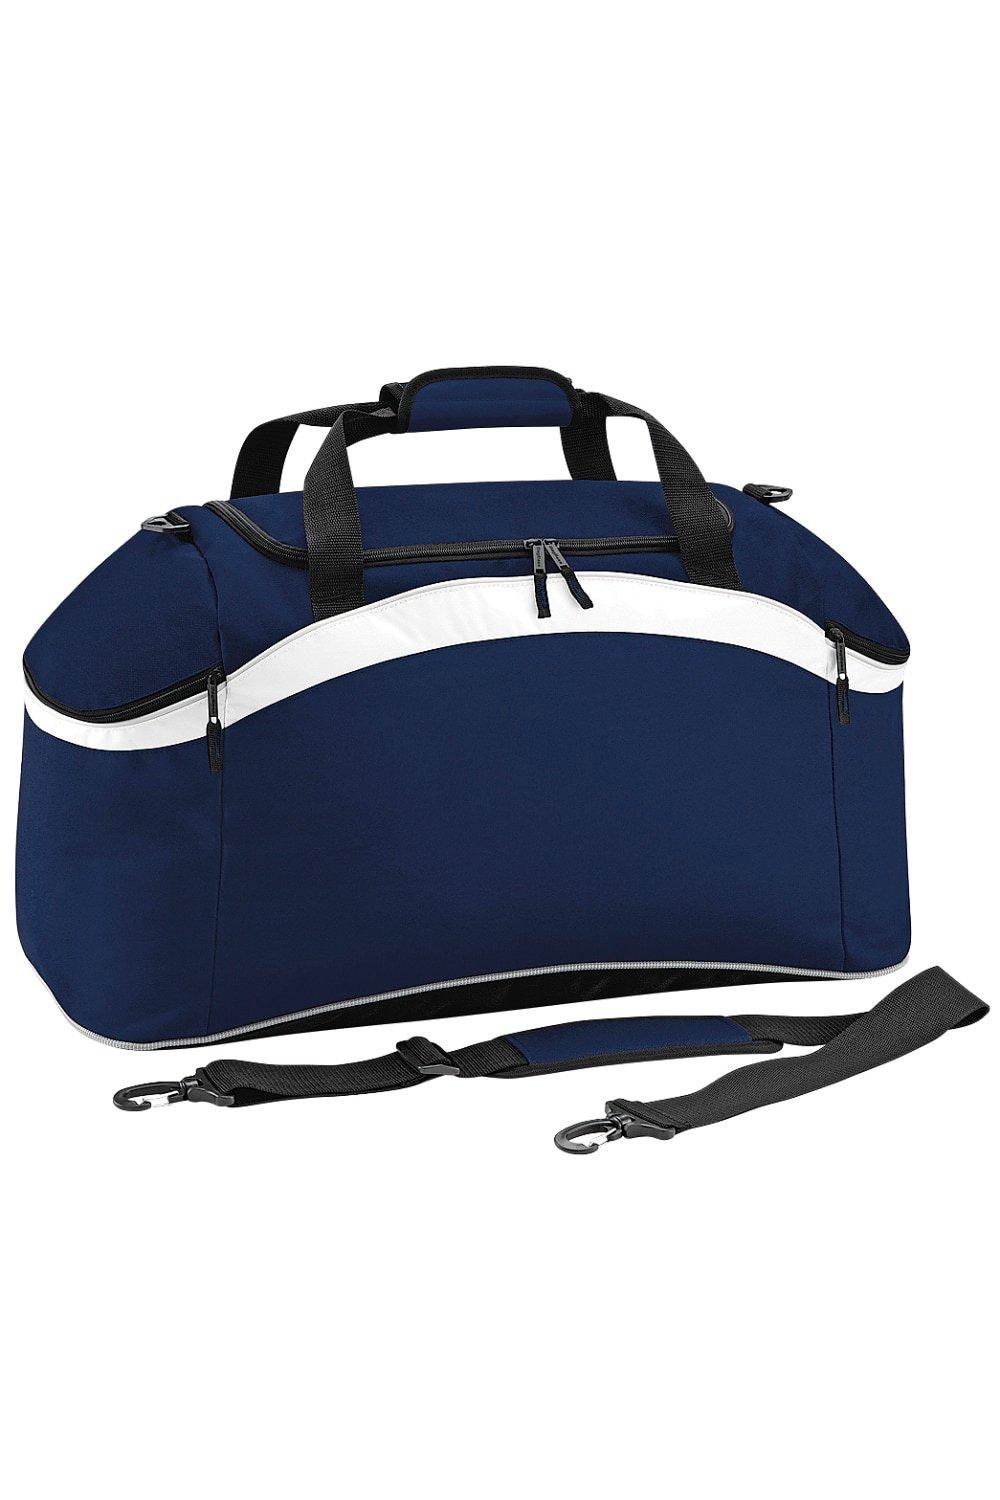 Teamwear Sport Holdall Duffle Bag (54 Litres) Pack of 2